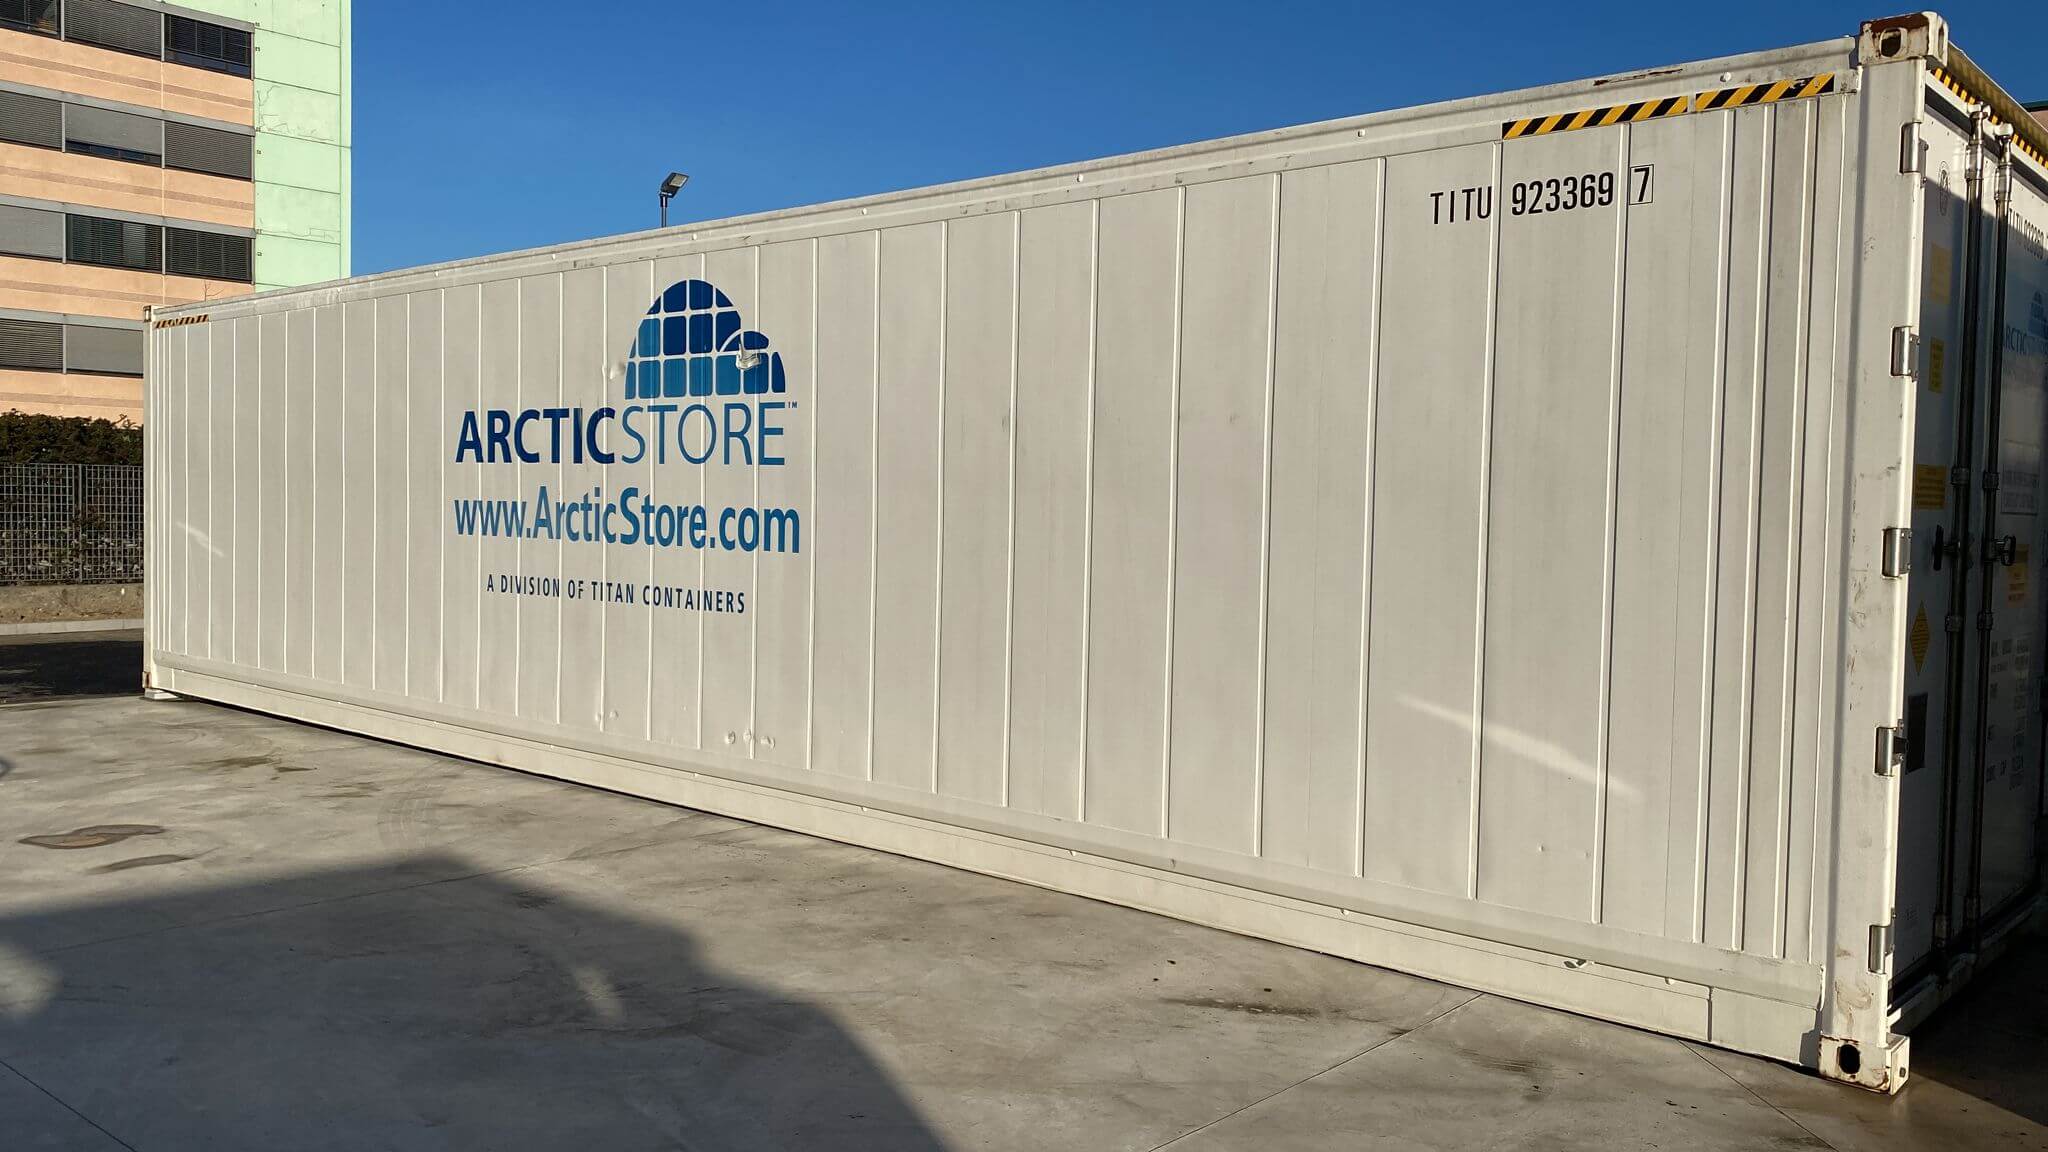 Superstore 3 Bavaria Italy - TITAN Containers